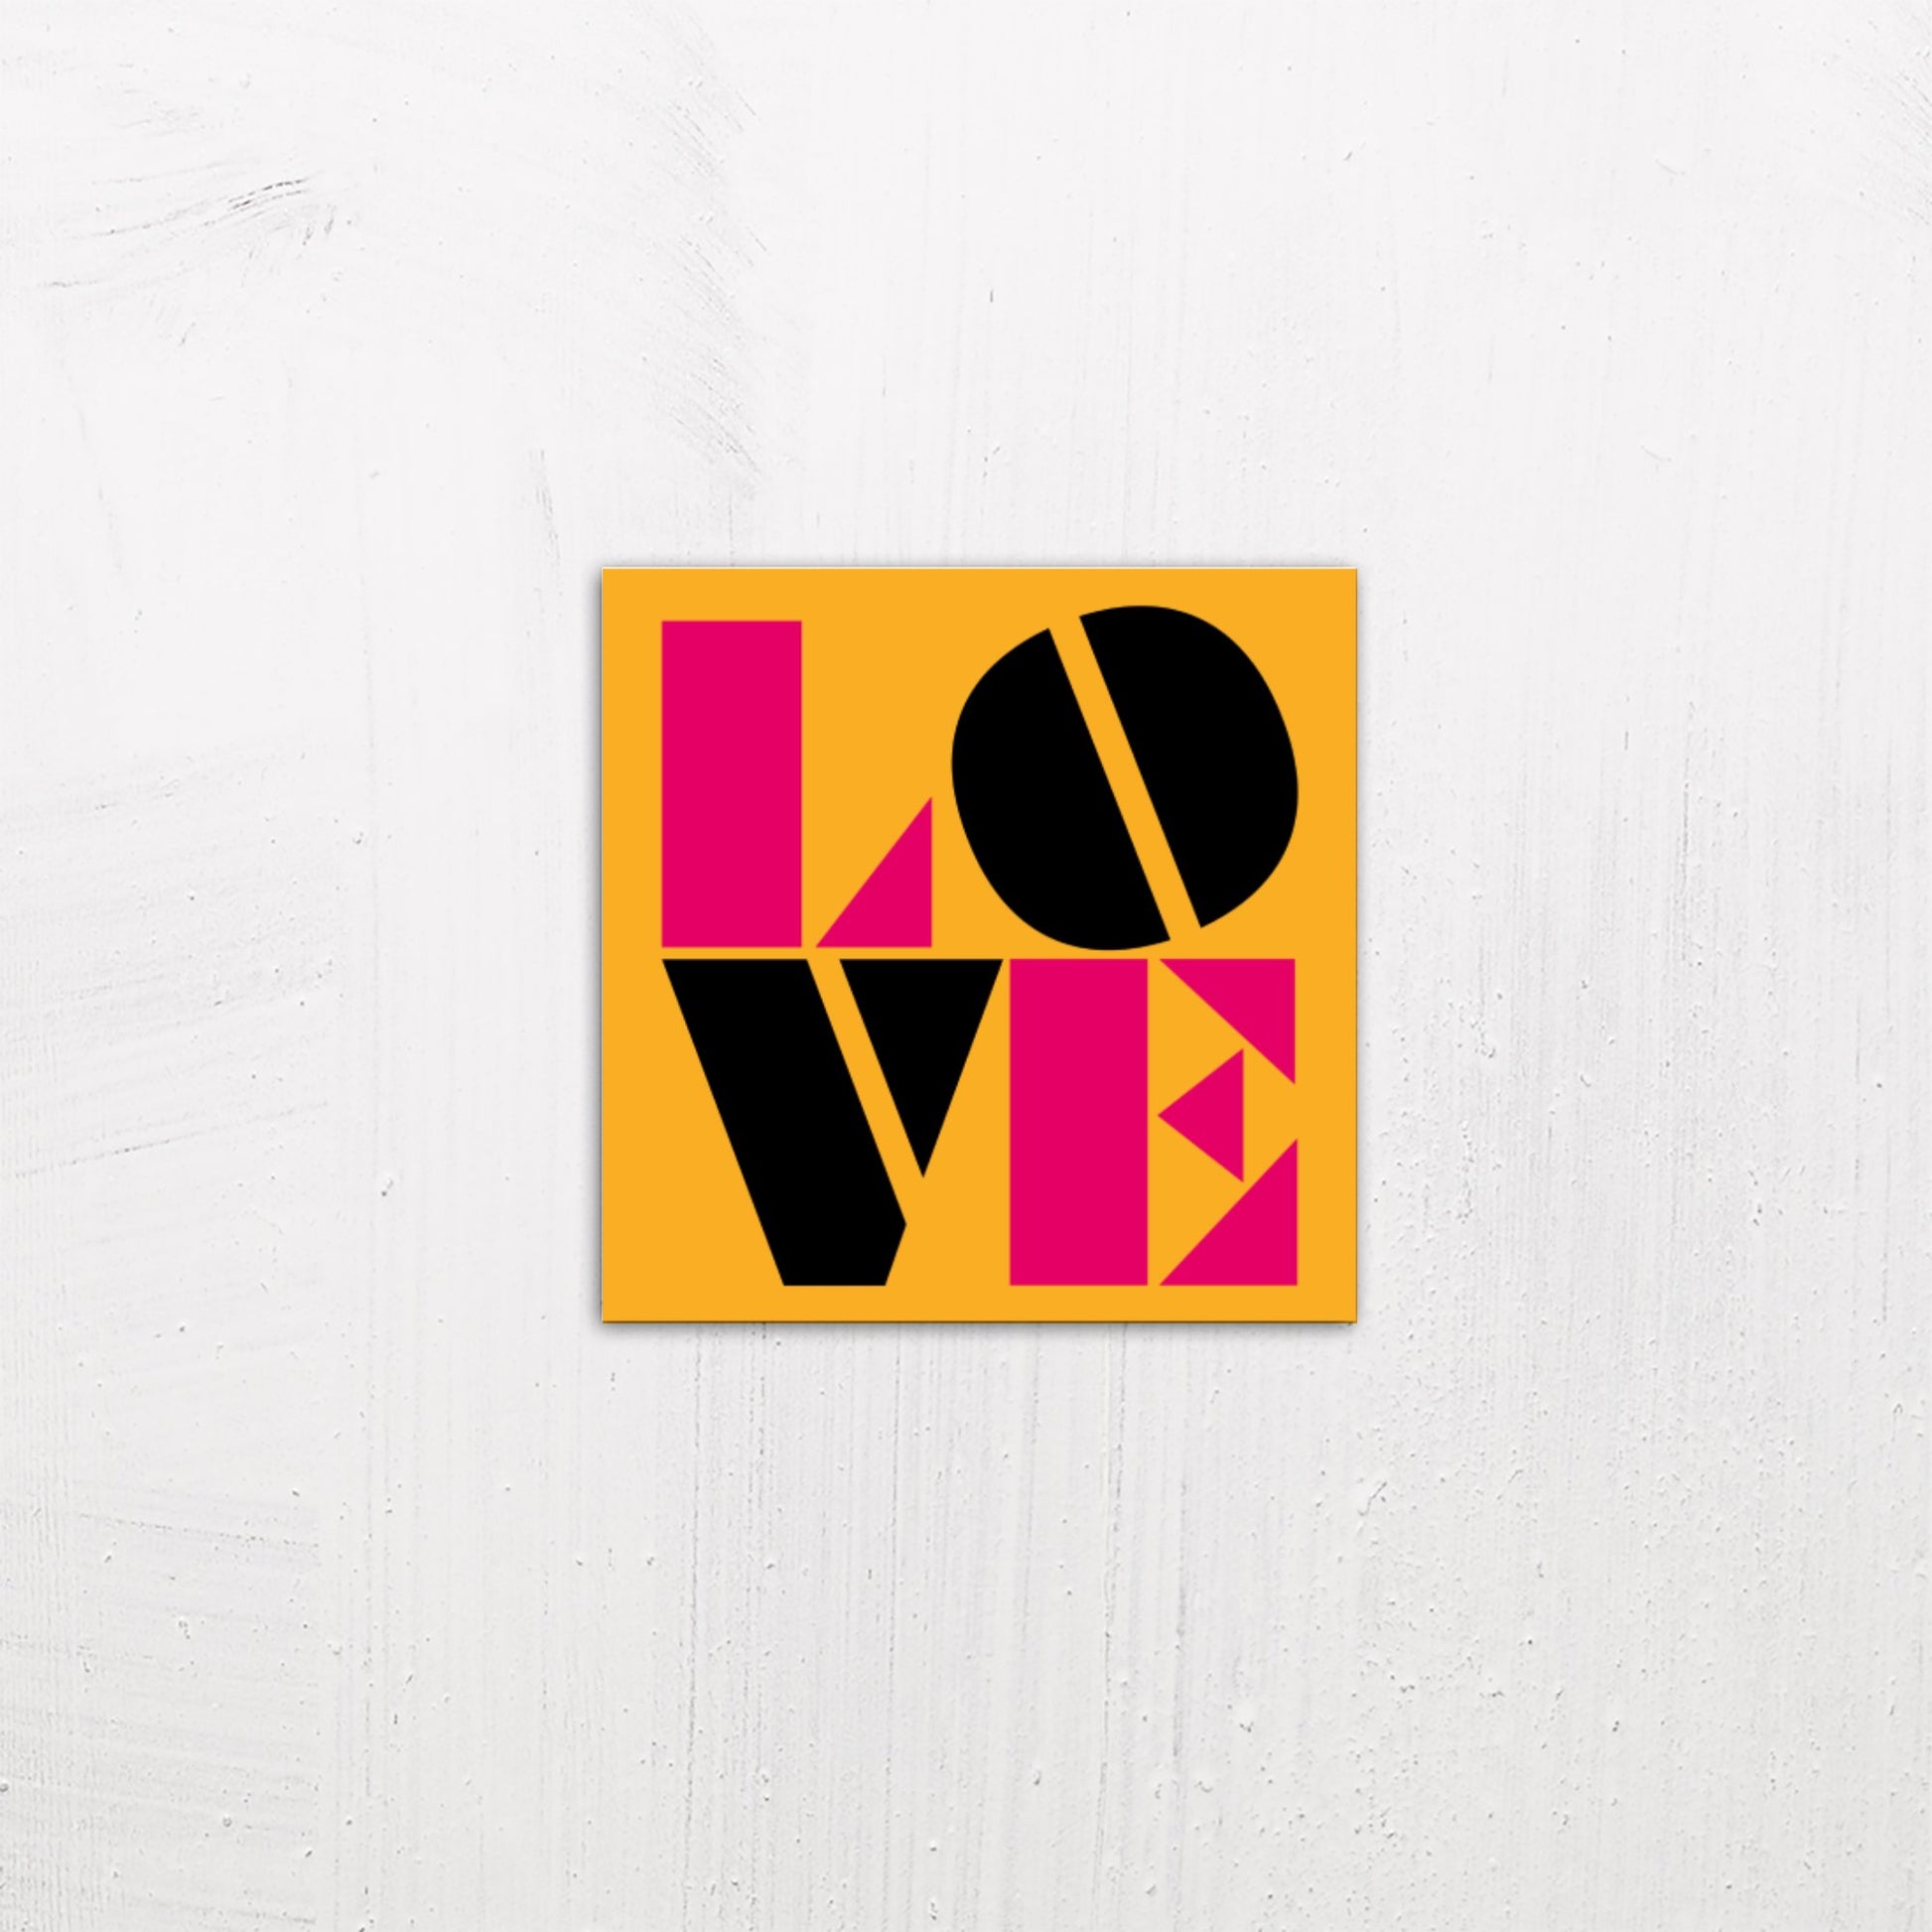 A small size metal art poster display plate with printed design of a Typographic Love Design